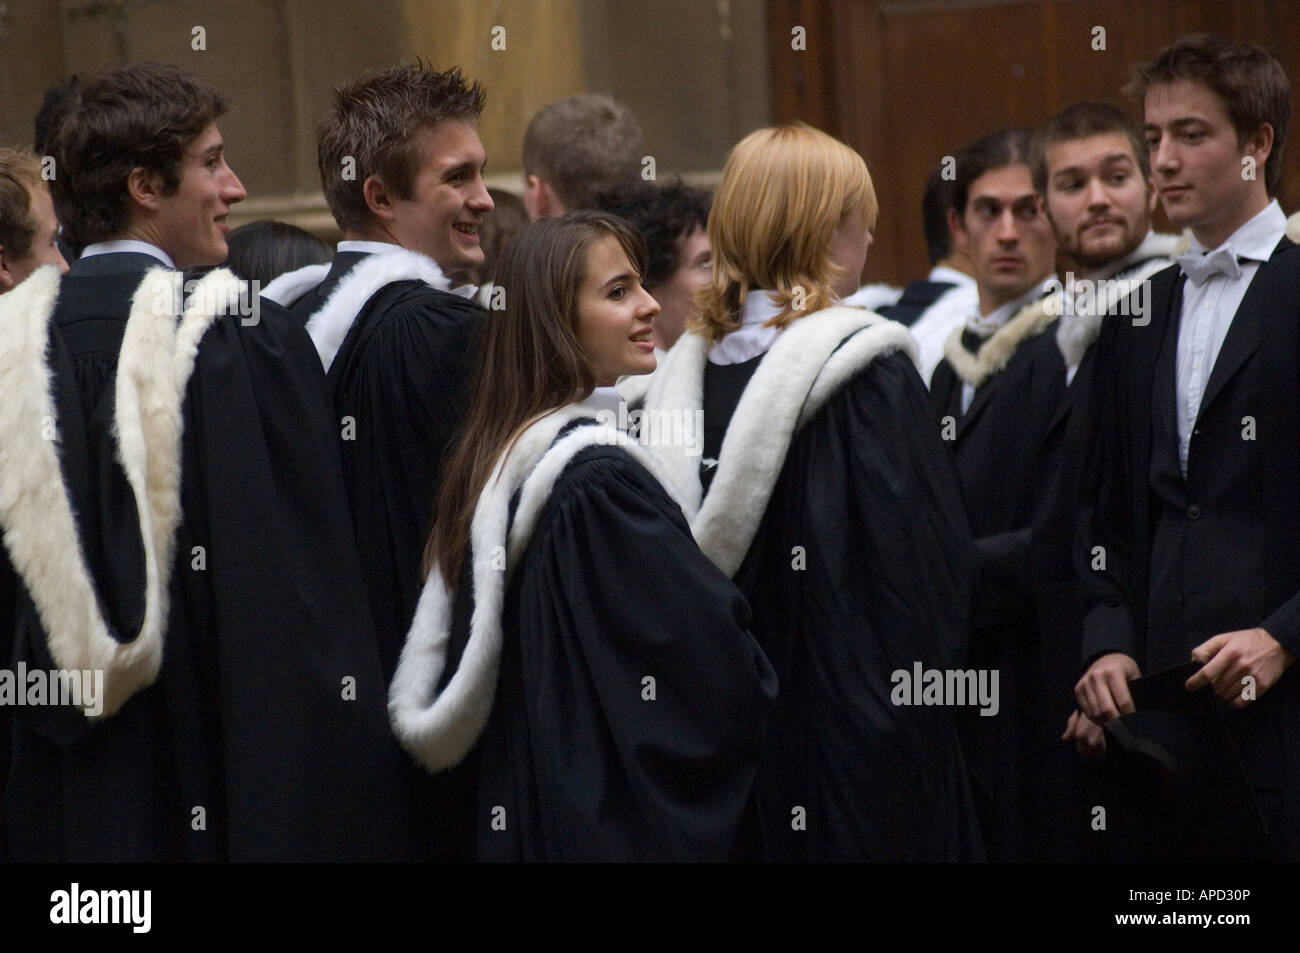 The degree ceremony at Oxford a moment for celebration and reflection when students get their degrees Stock Photo